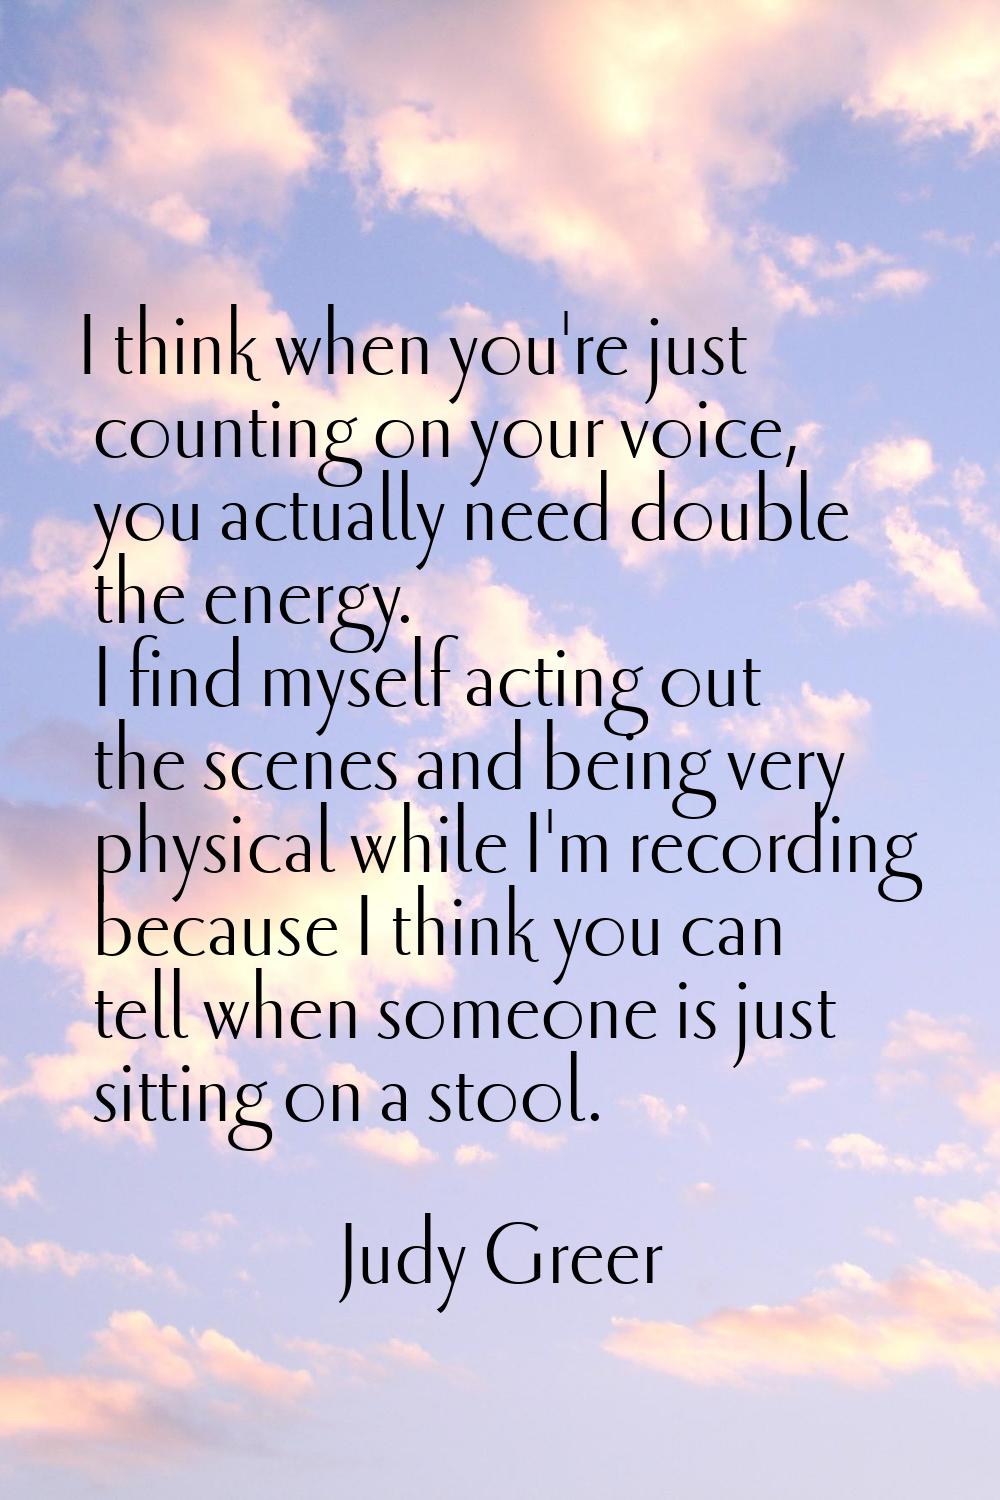 I think when you're just counting on your voice, you actually need double the energy. I find myself